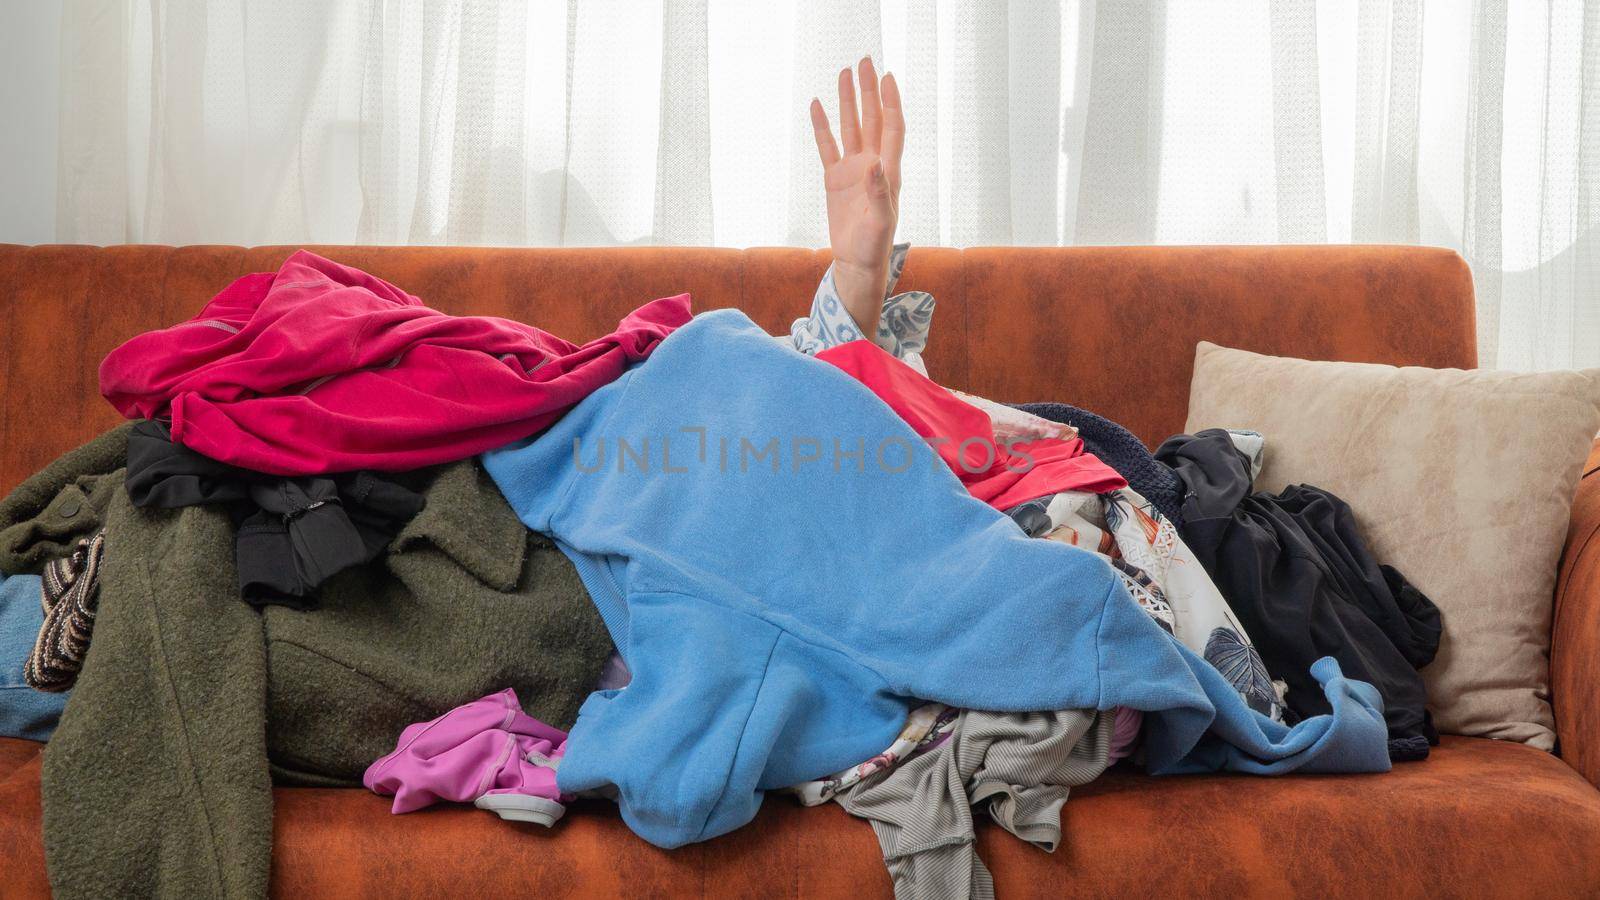 Dependence on things, conscious consumption of clothes, shopaholic, hand reaching out of a pile of clothes. High quality photo